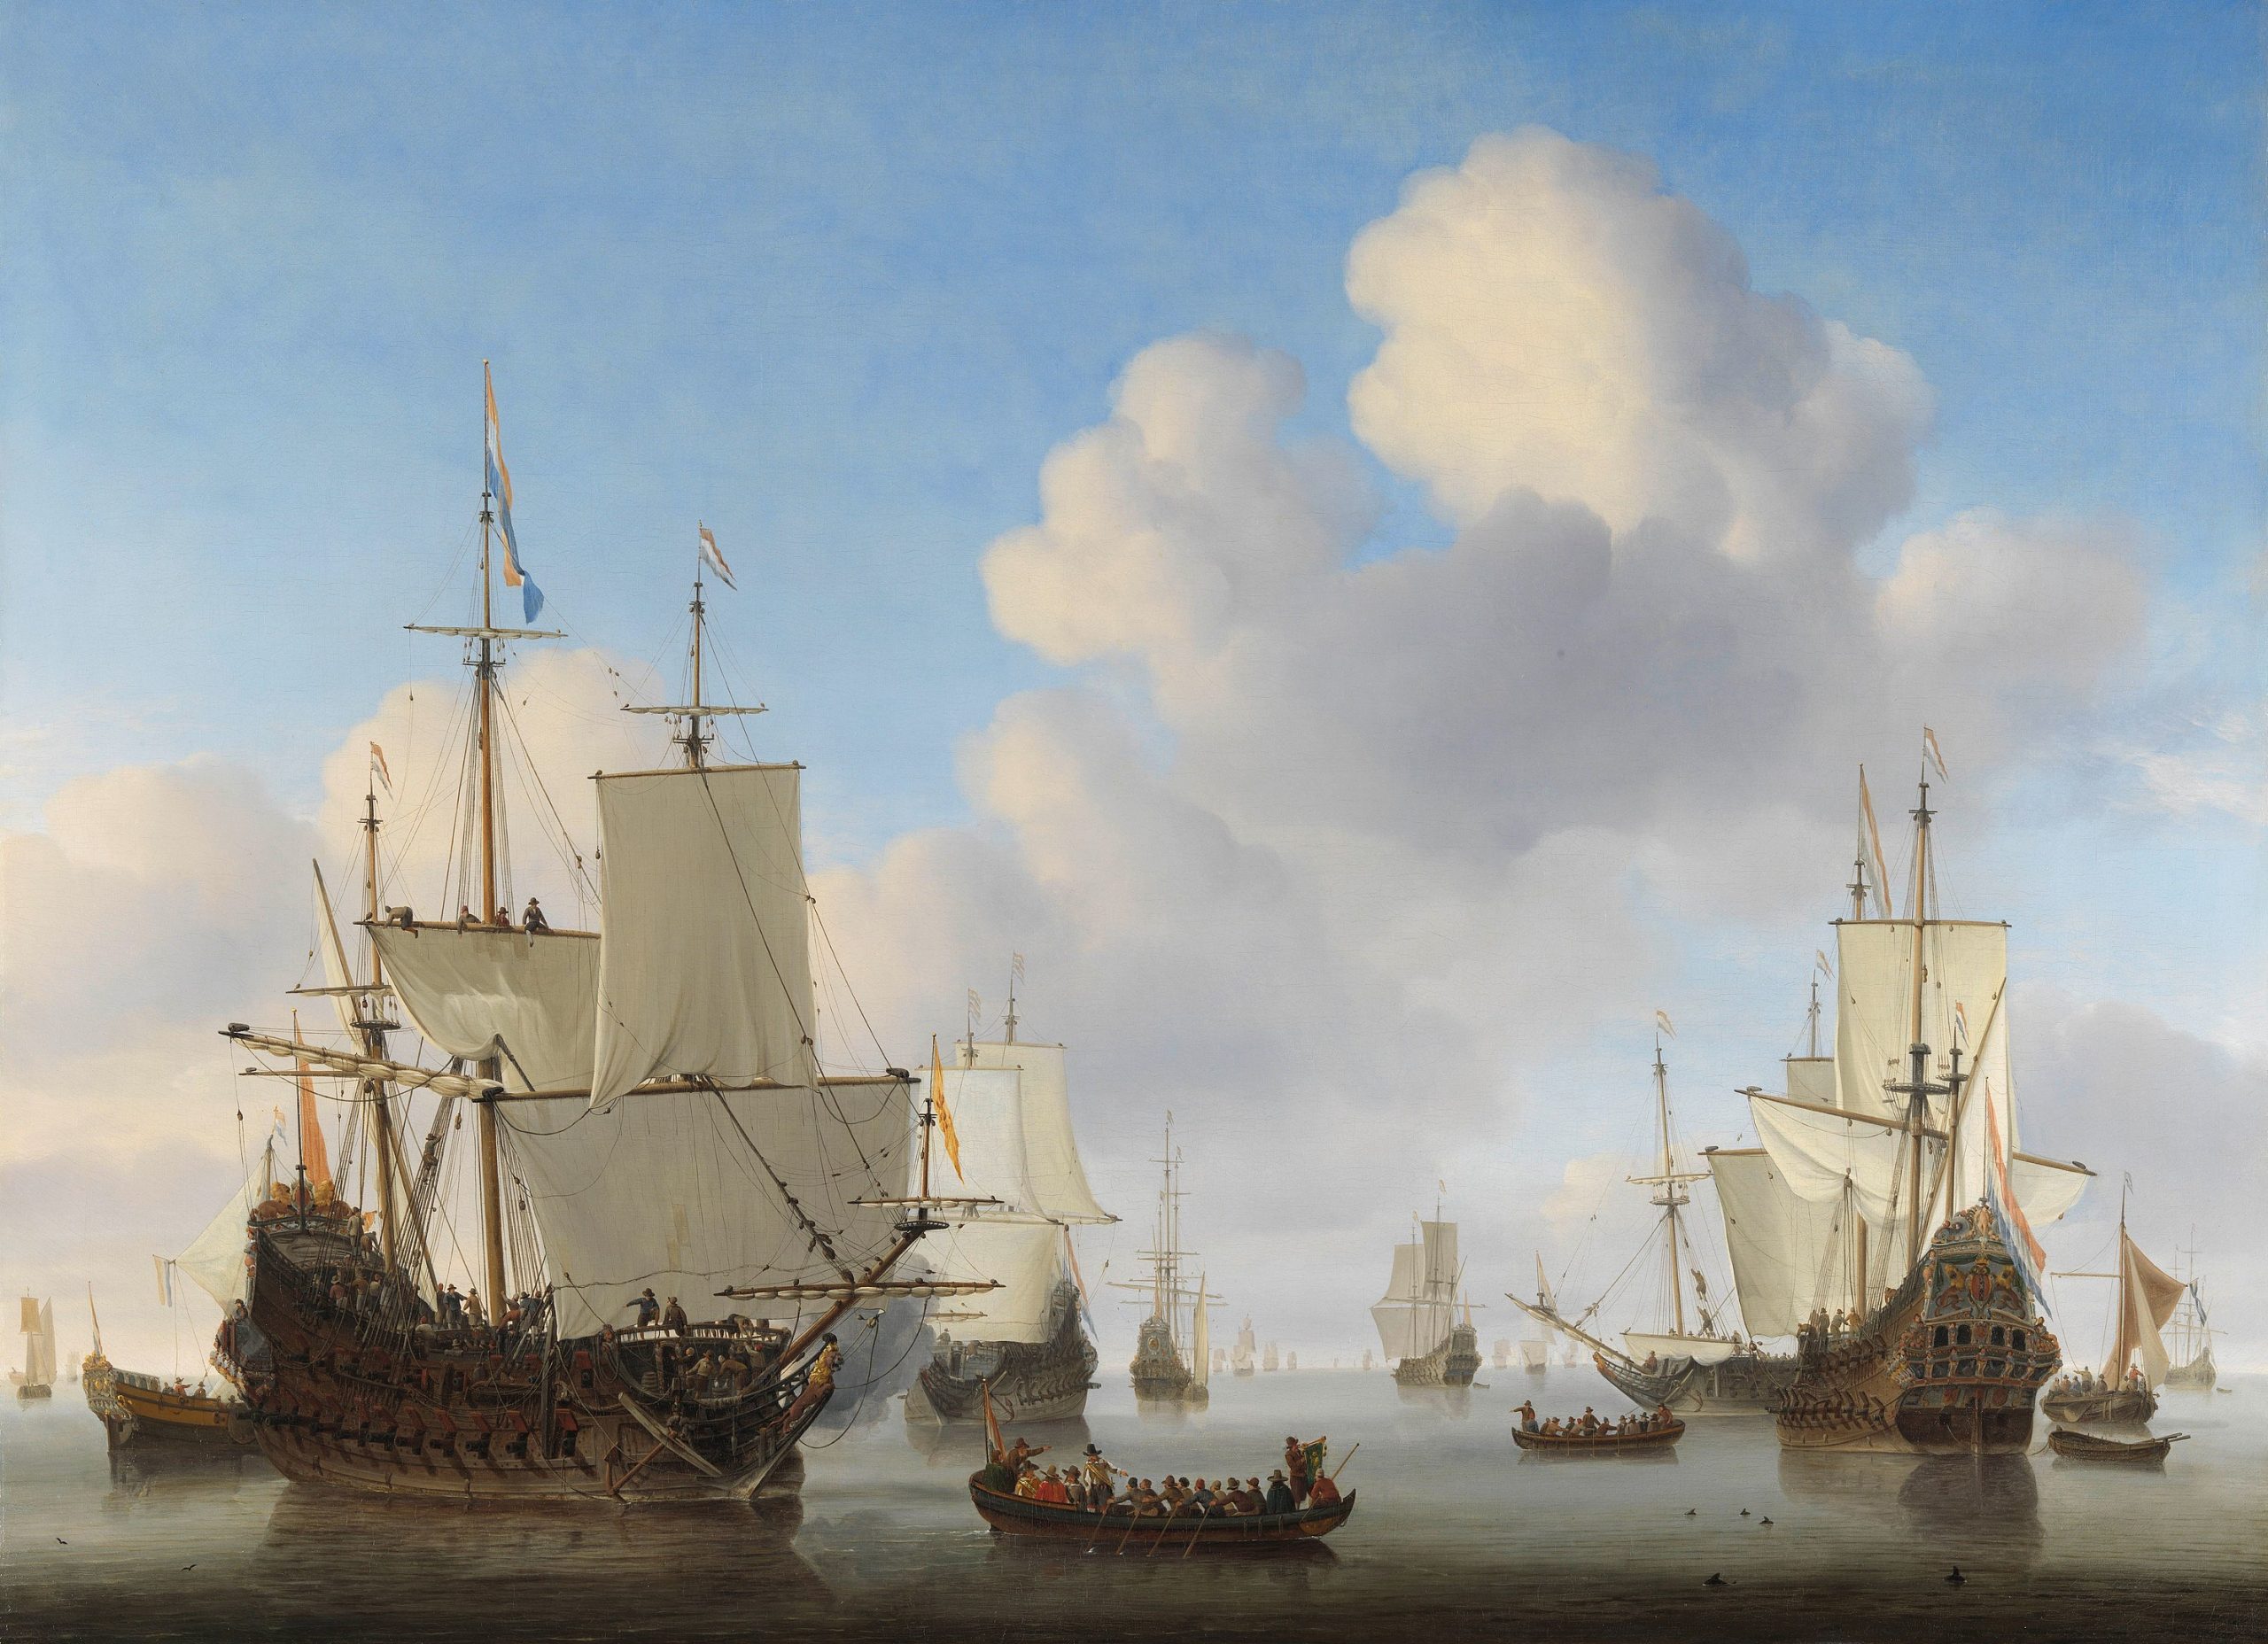 Large ships and small boats on a calm sea